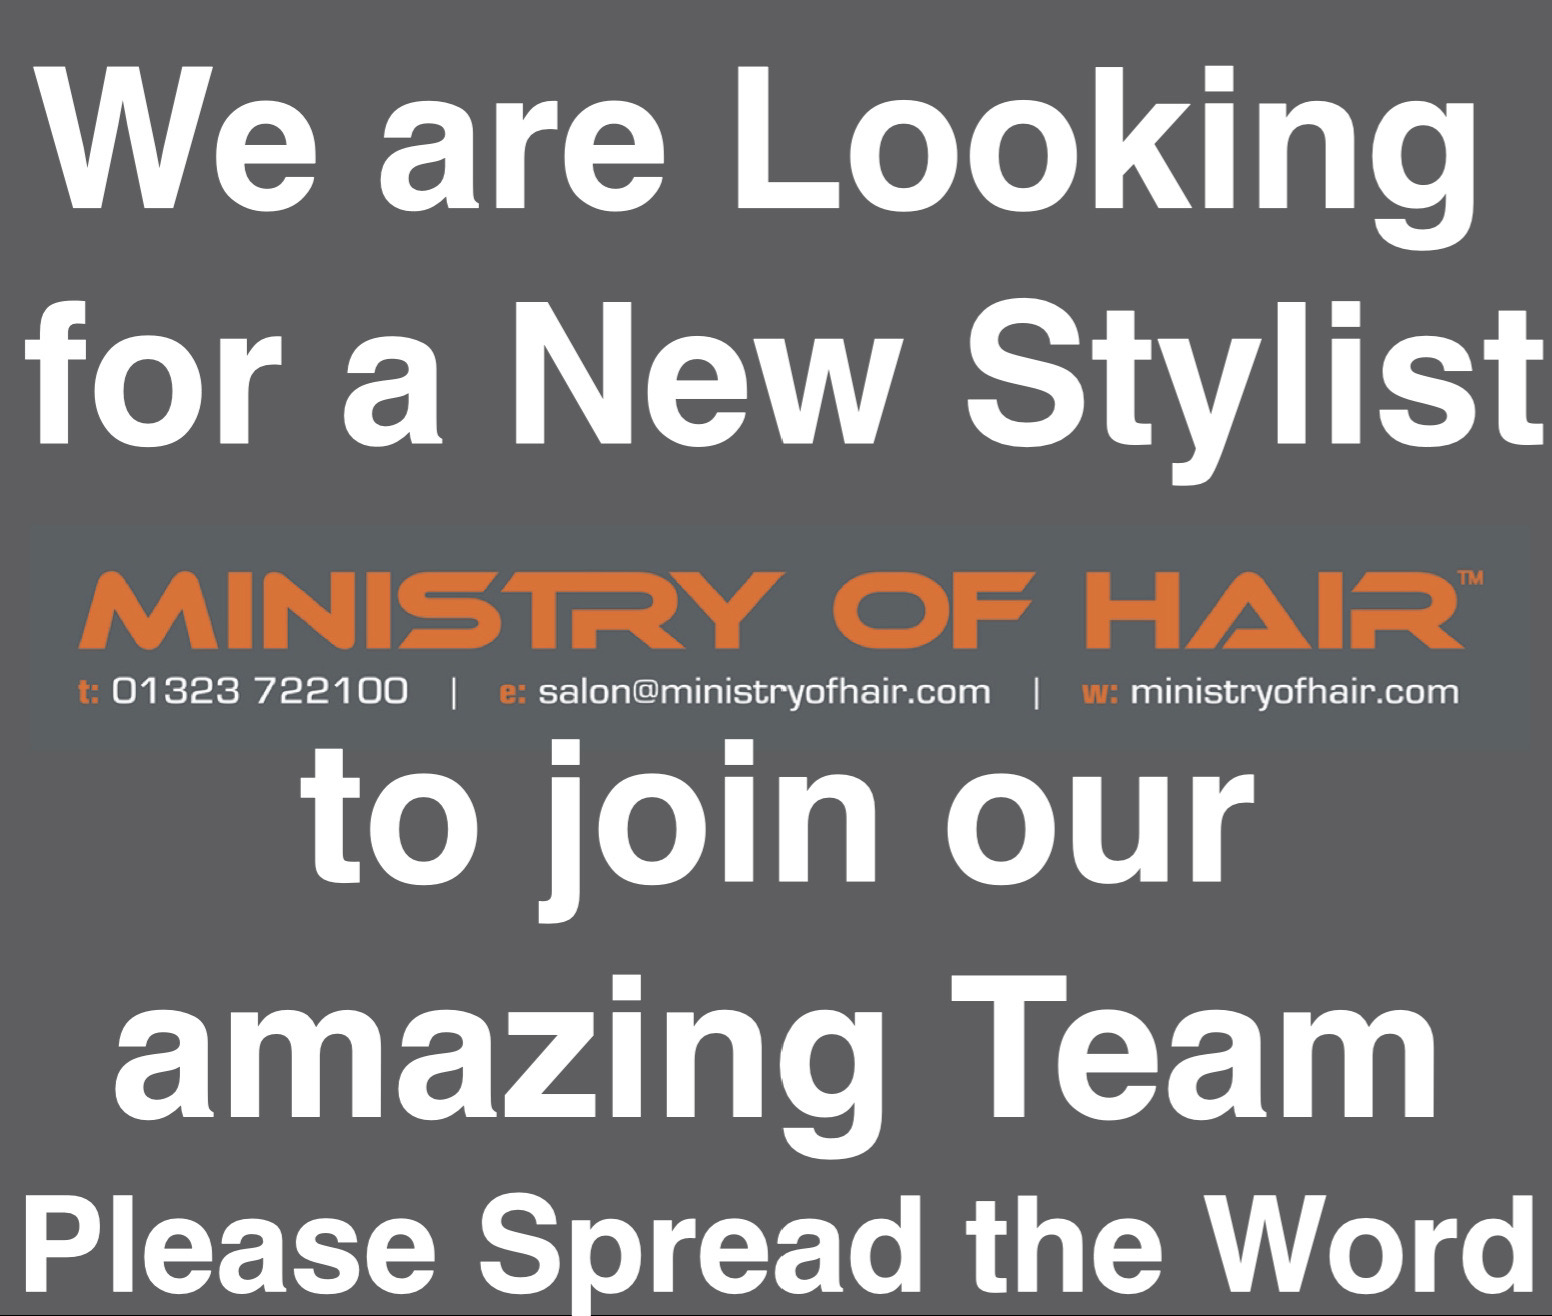 Currently we are looking for a Senior Stylist to join our Team